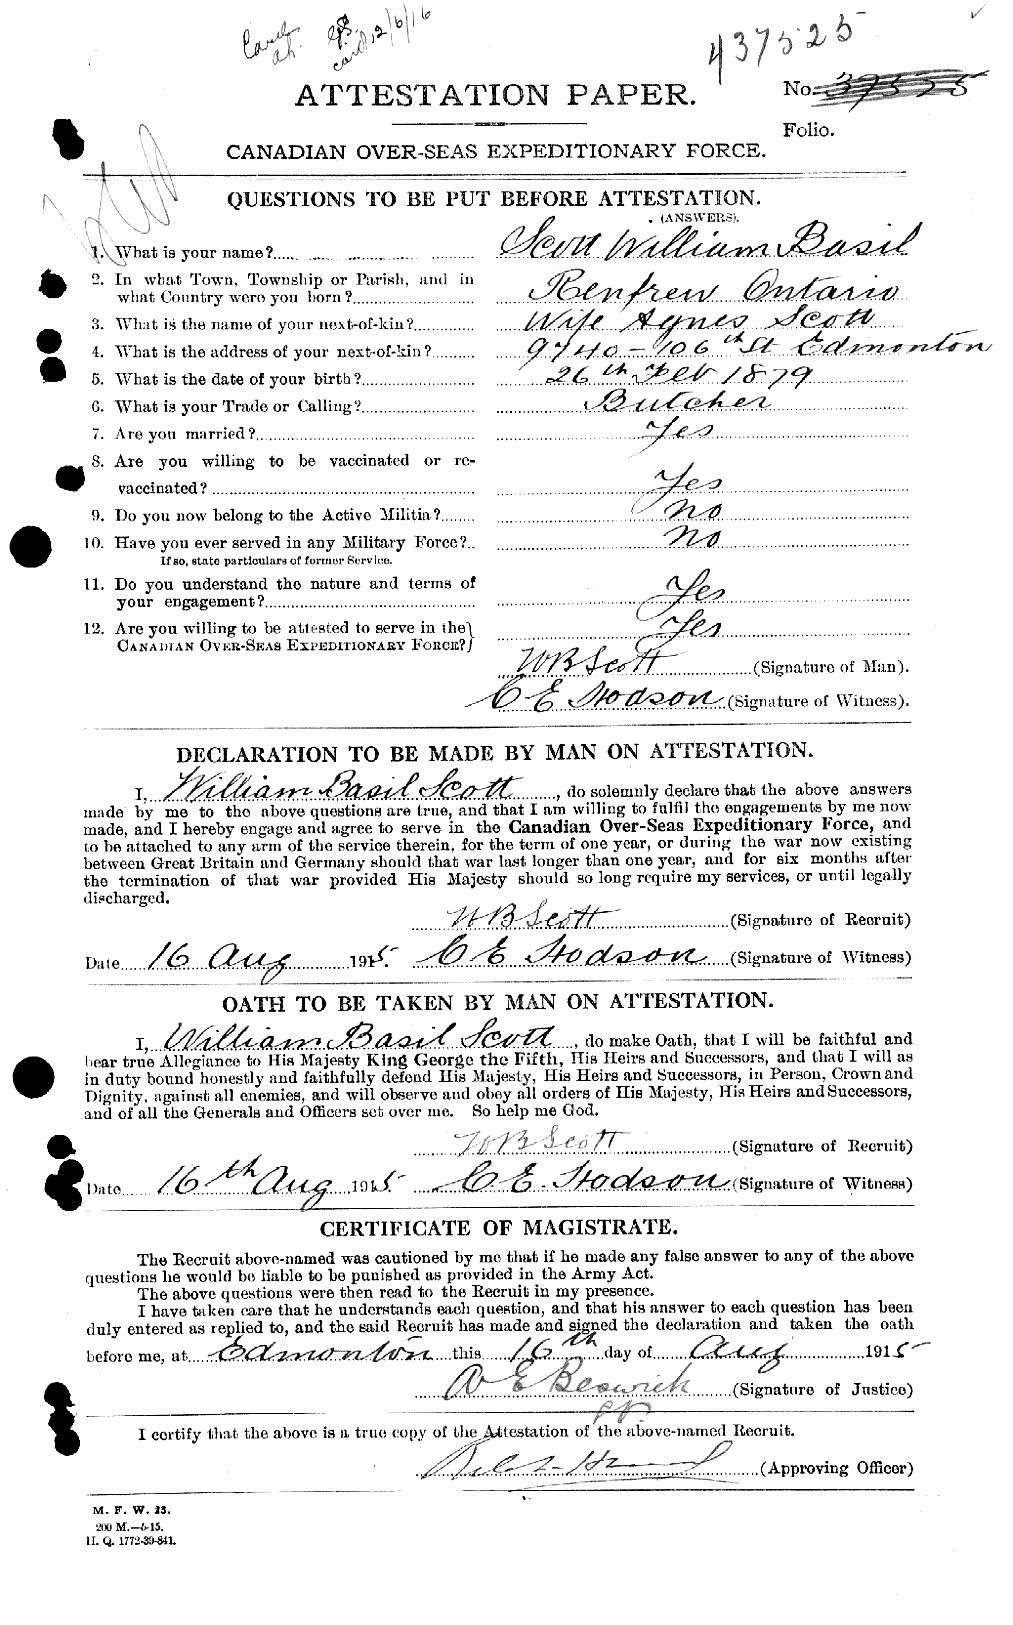 Personnel Records of the First World War - CEF 051310a